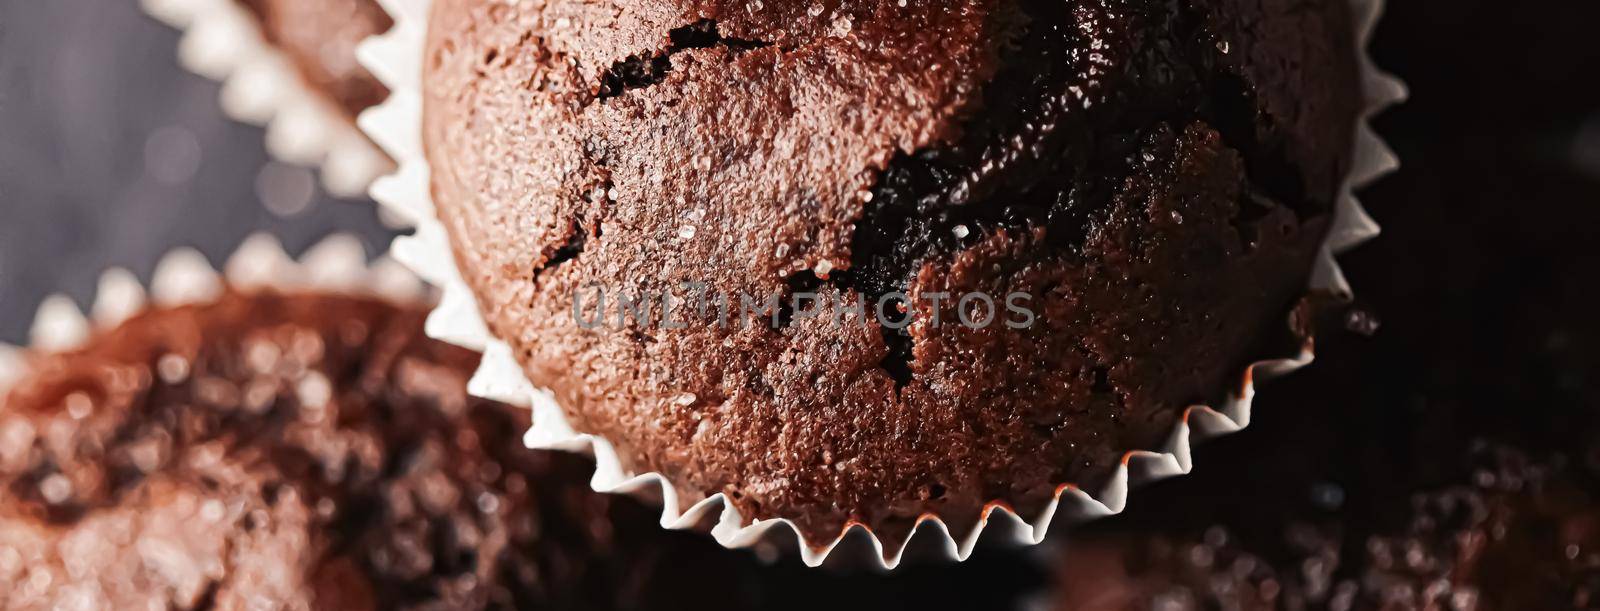 Homemade chocolate muffins, baked comfort food recipe concept